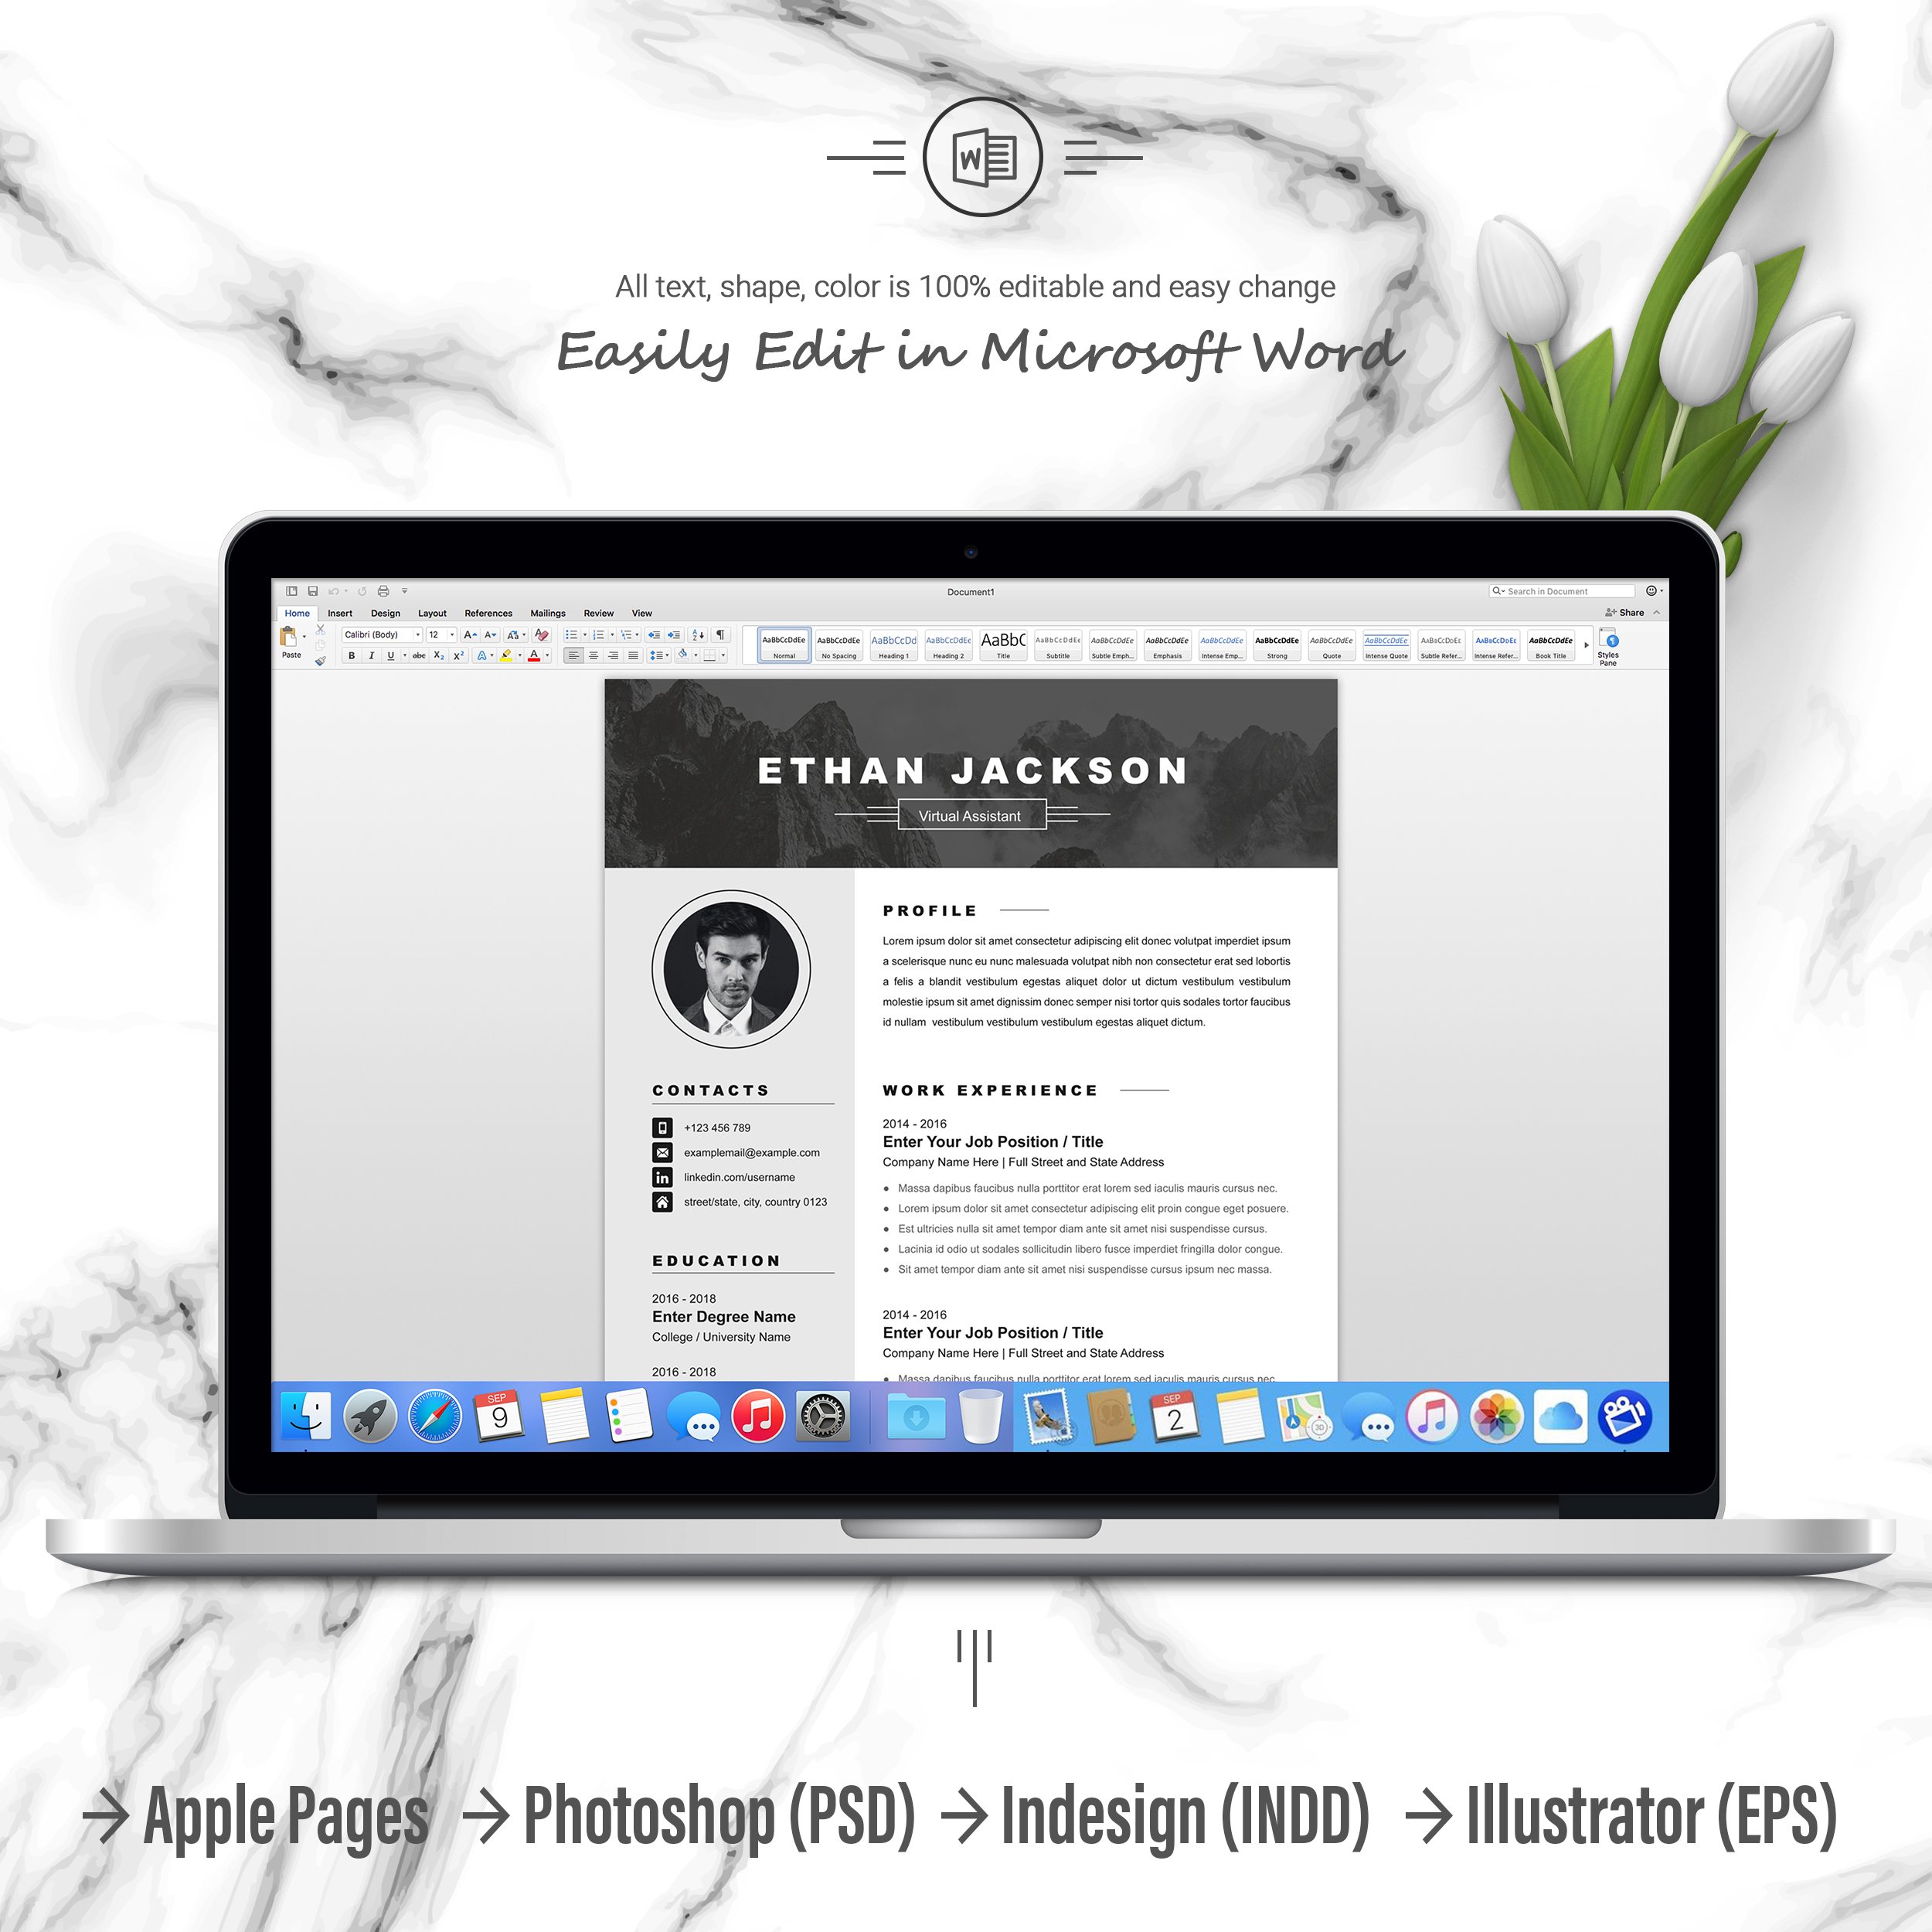 06 3 pages free resume ms word file format design template 439 1